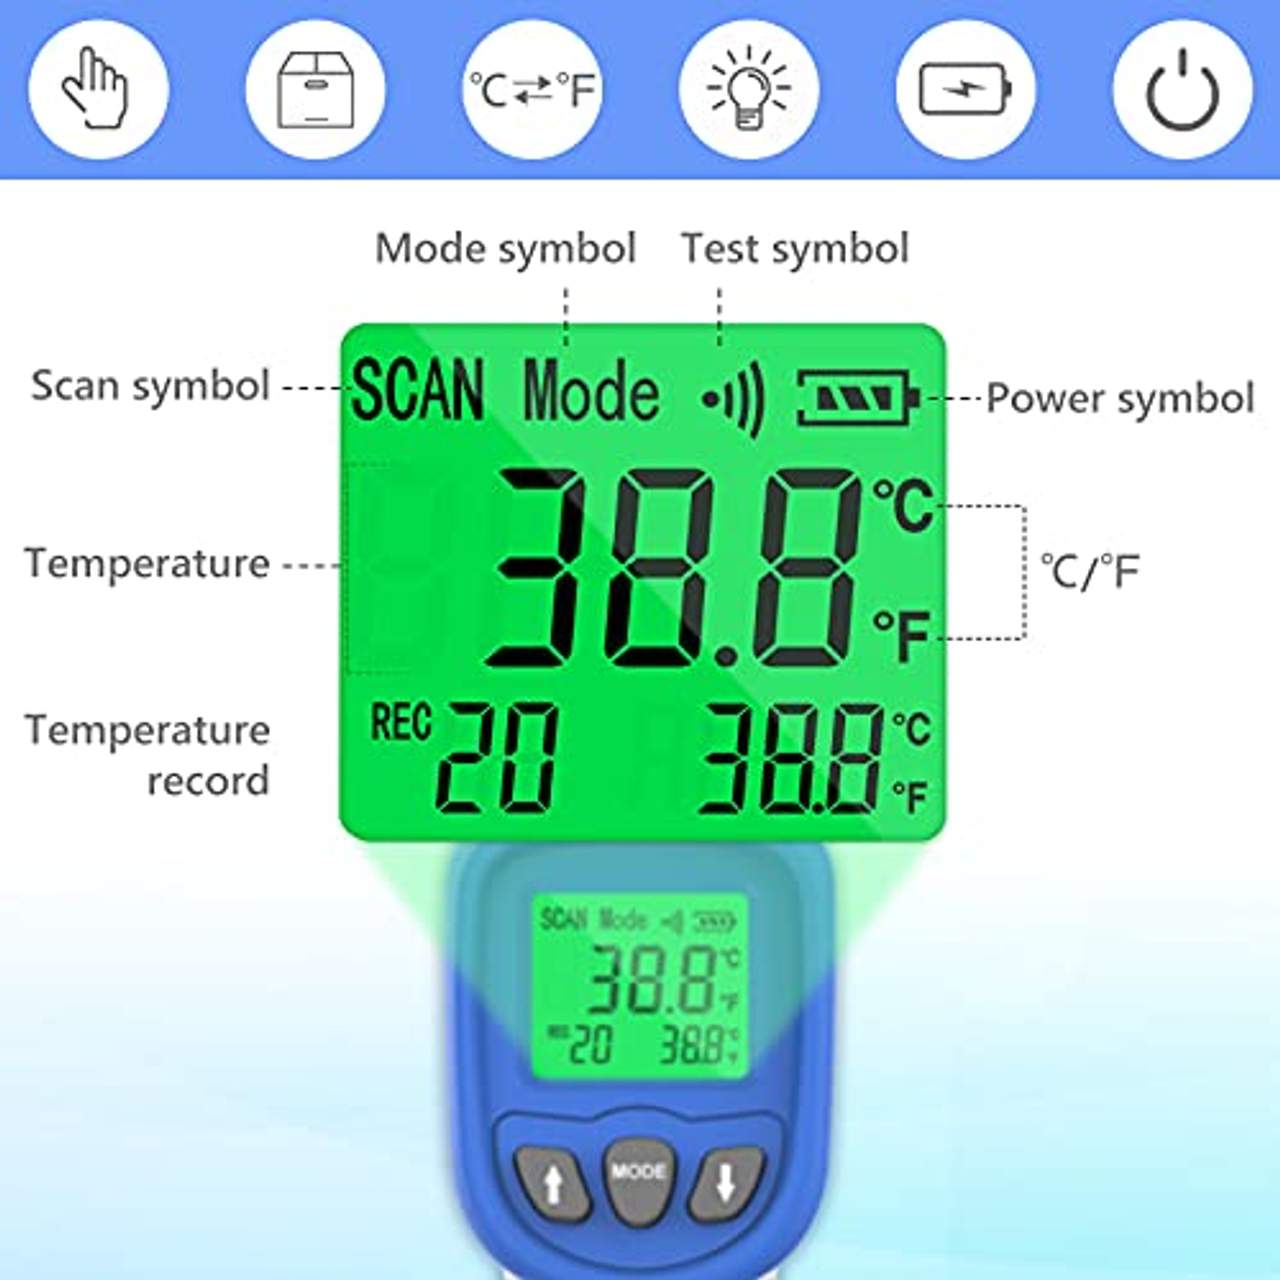 Infrarot Thermometer 32 ℃ ～ 43 ℃